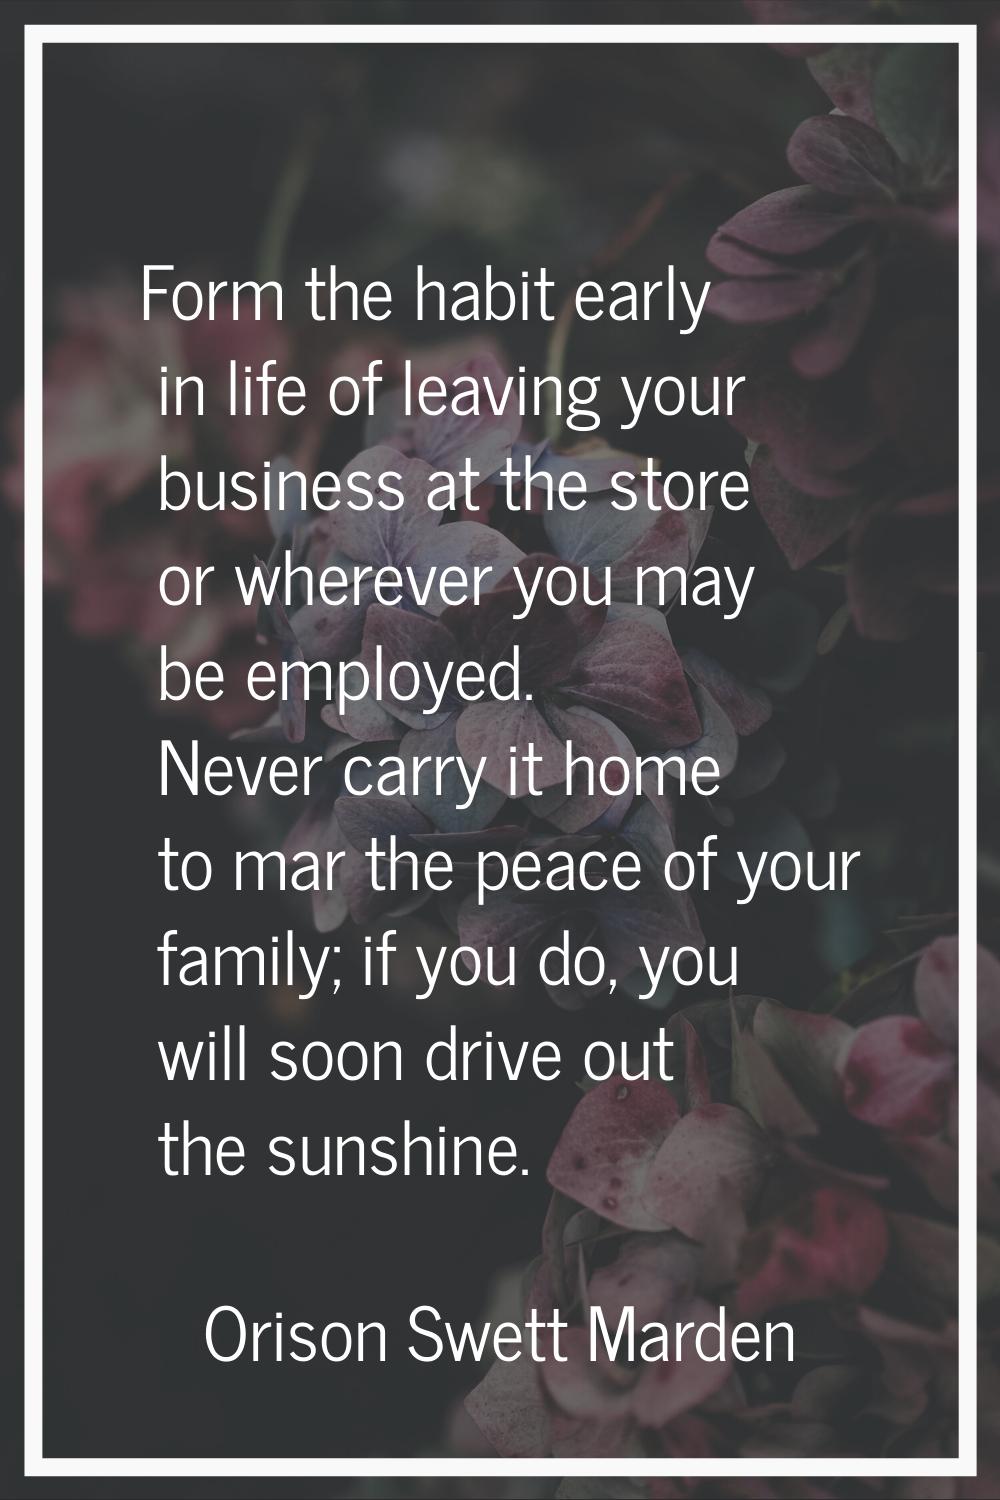 Form the habit early in life of leaving your business at the store or wherever you may be employed.